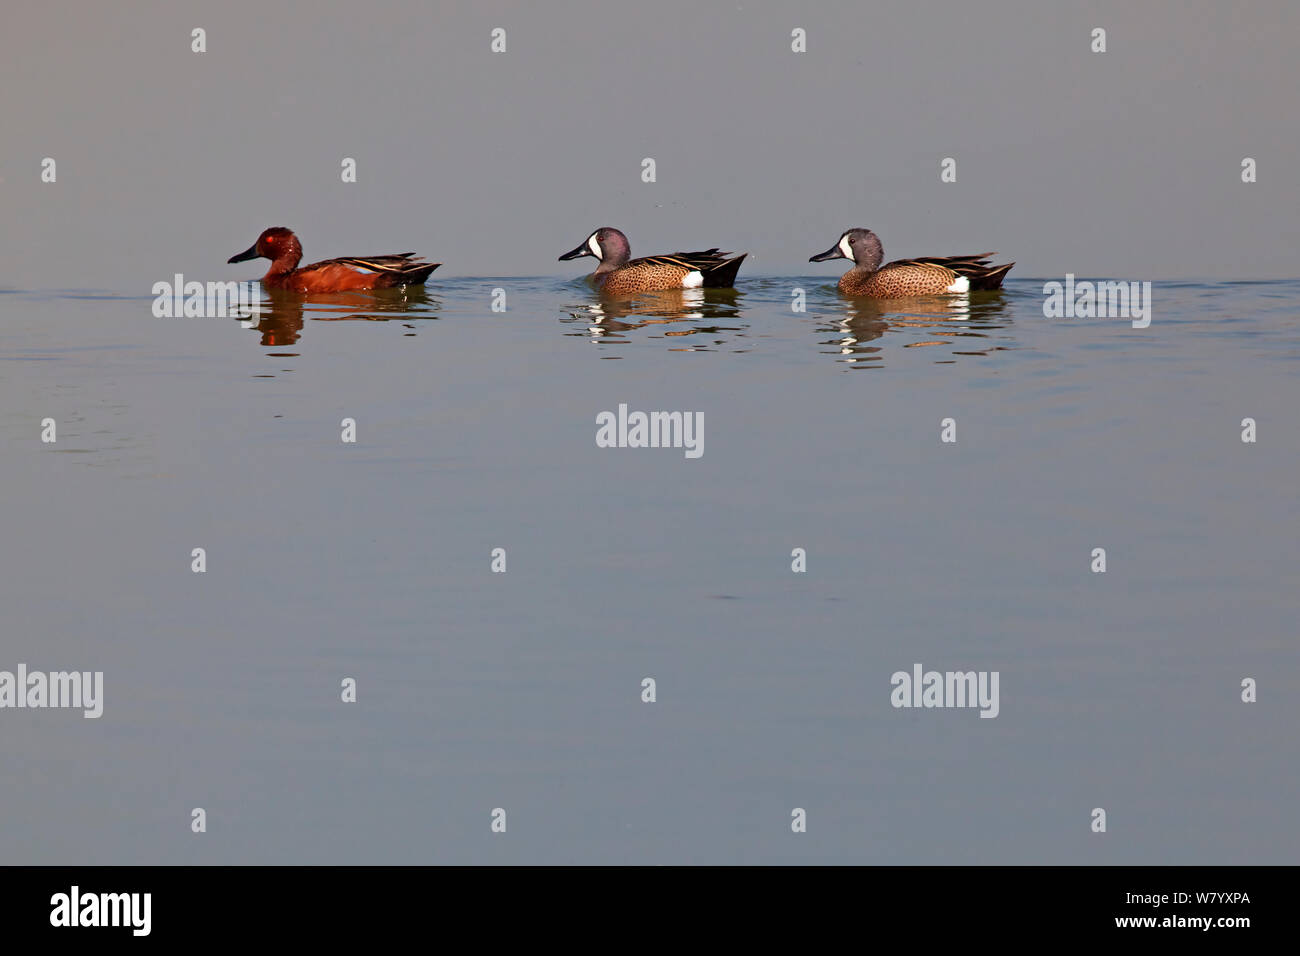 Cinnammon teal (Spatula cyanoptera septentrionalium) male and two Blue-winged teal (Anas discors) males, Xochimilco wetlands, Mexico City, March Stock Photo